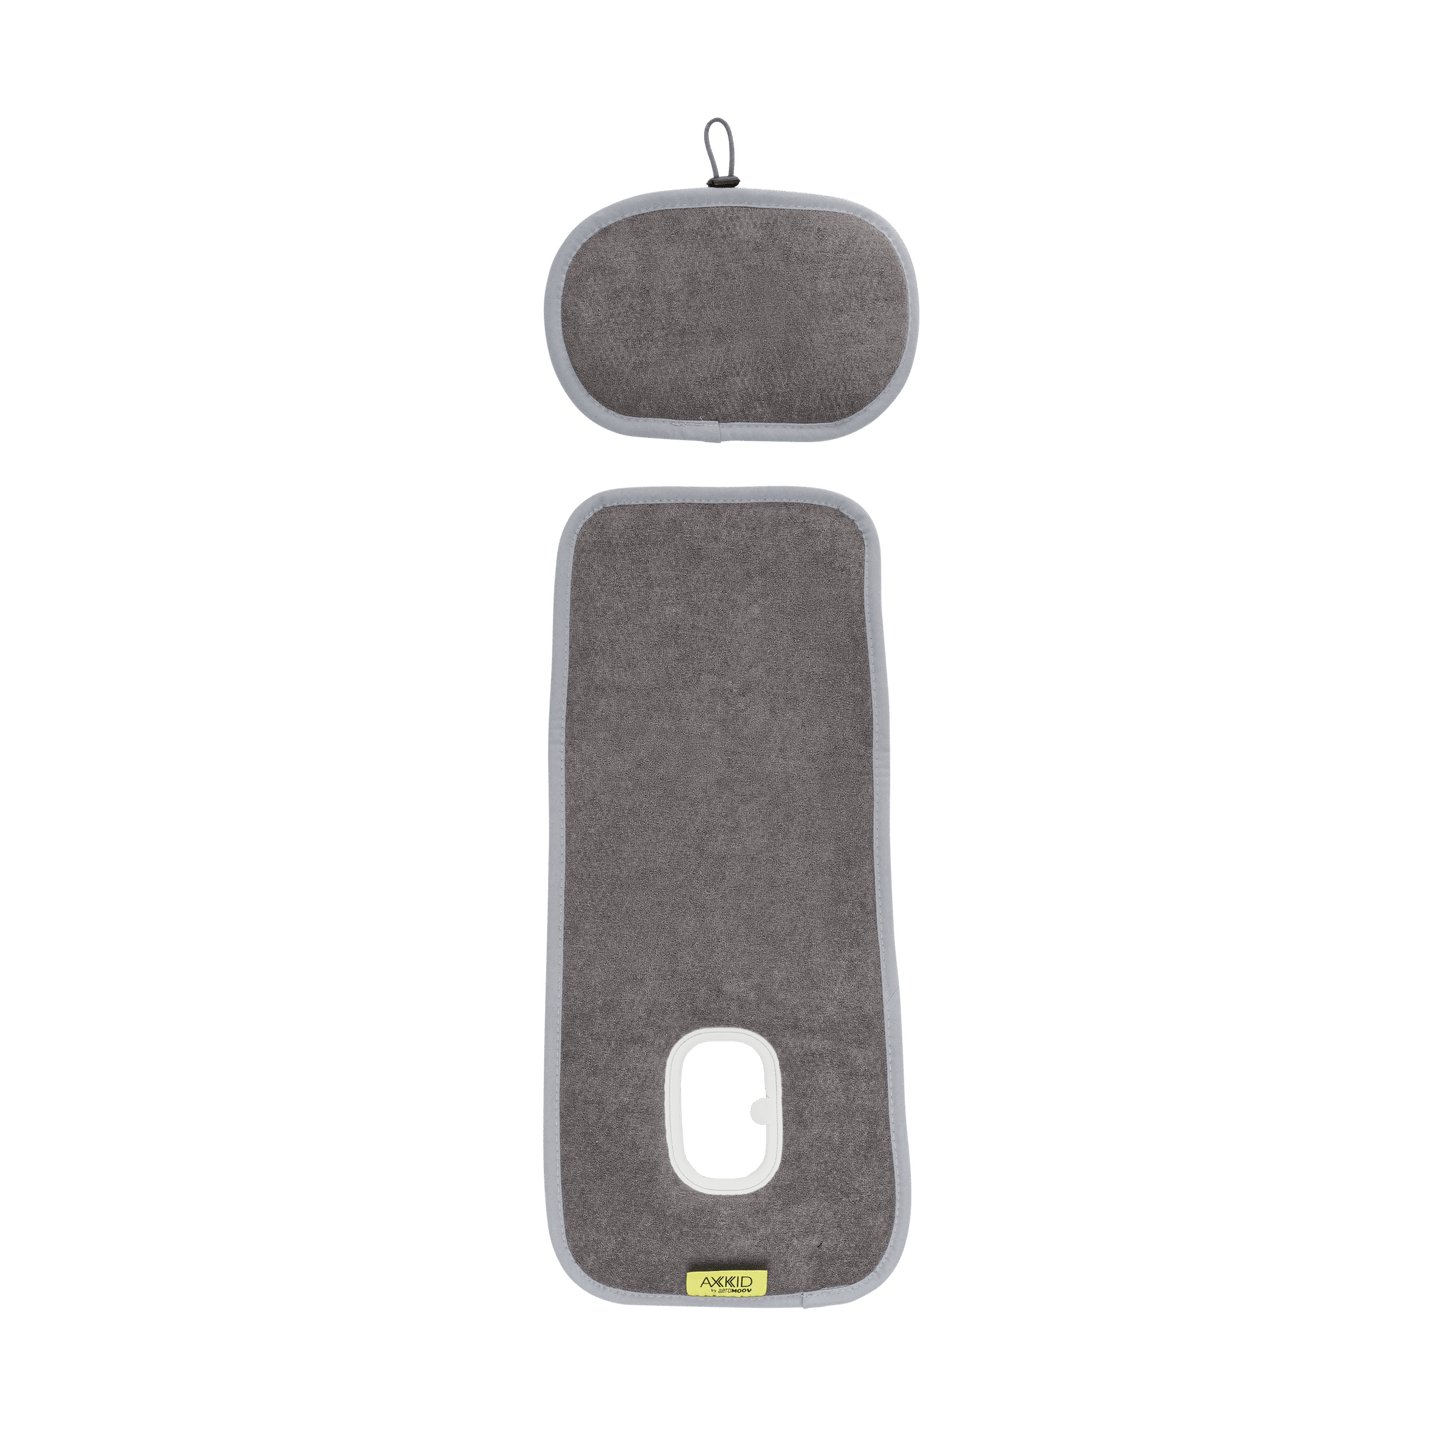 Axkid Cooling pads by AeroMoov